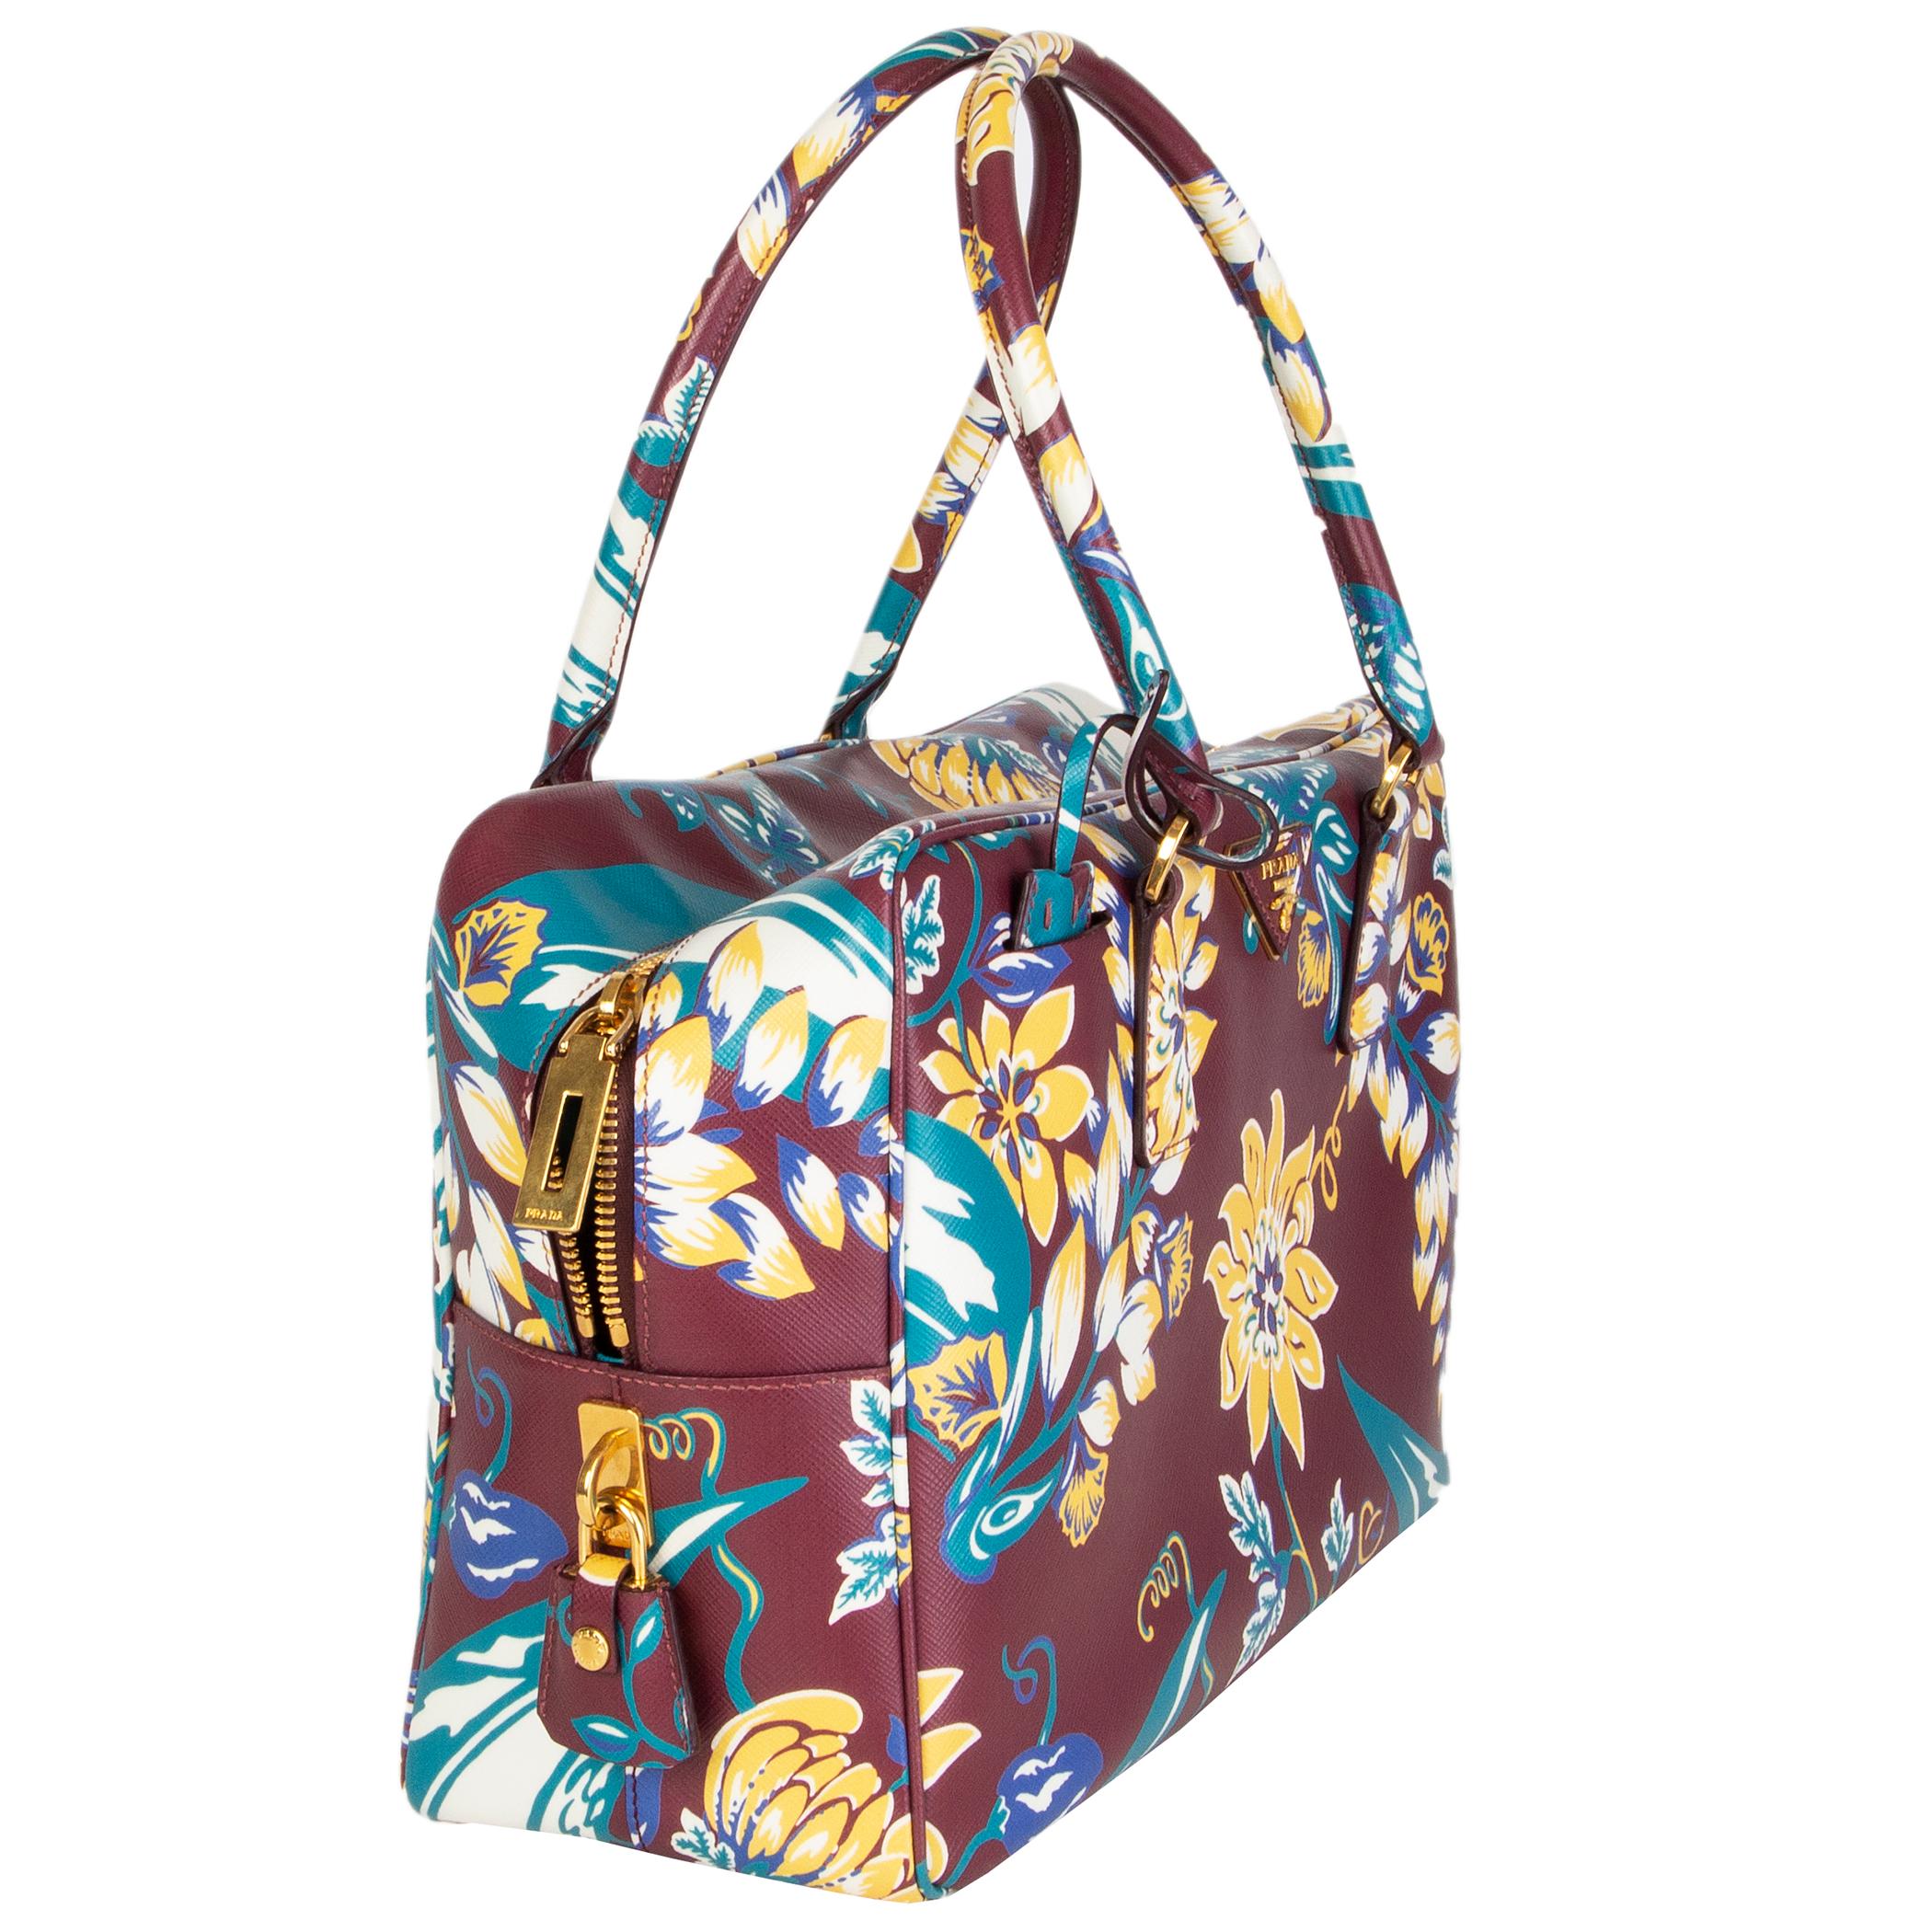 Prada floral-print satch in burgundy saffiano leather with details in petrol, yellow, white and blue. Closes with a zipper on top. Lined in petrol blue leather with two open pockets against the front and an open and zipper pocket against the back.